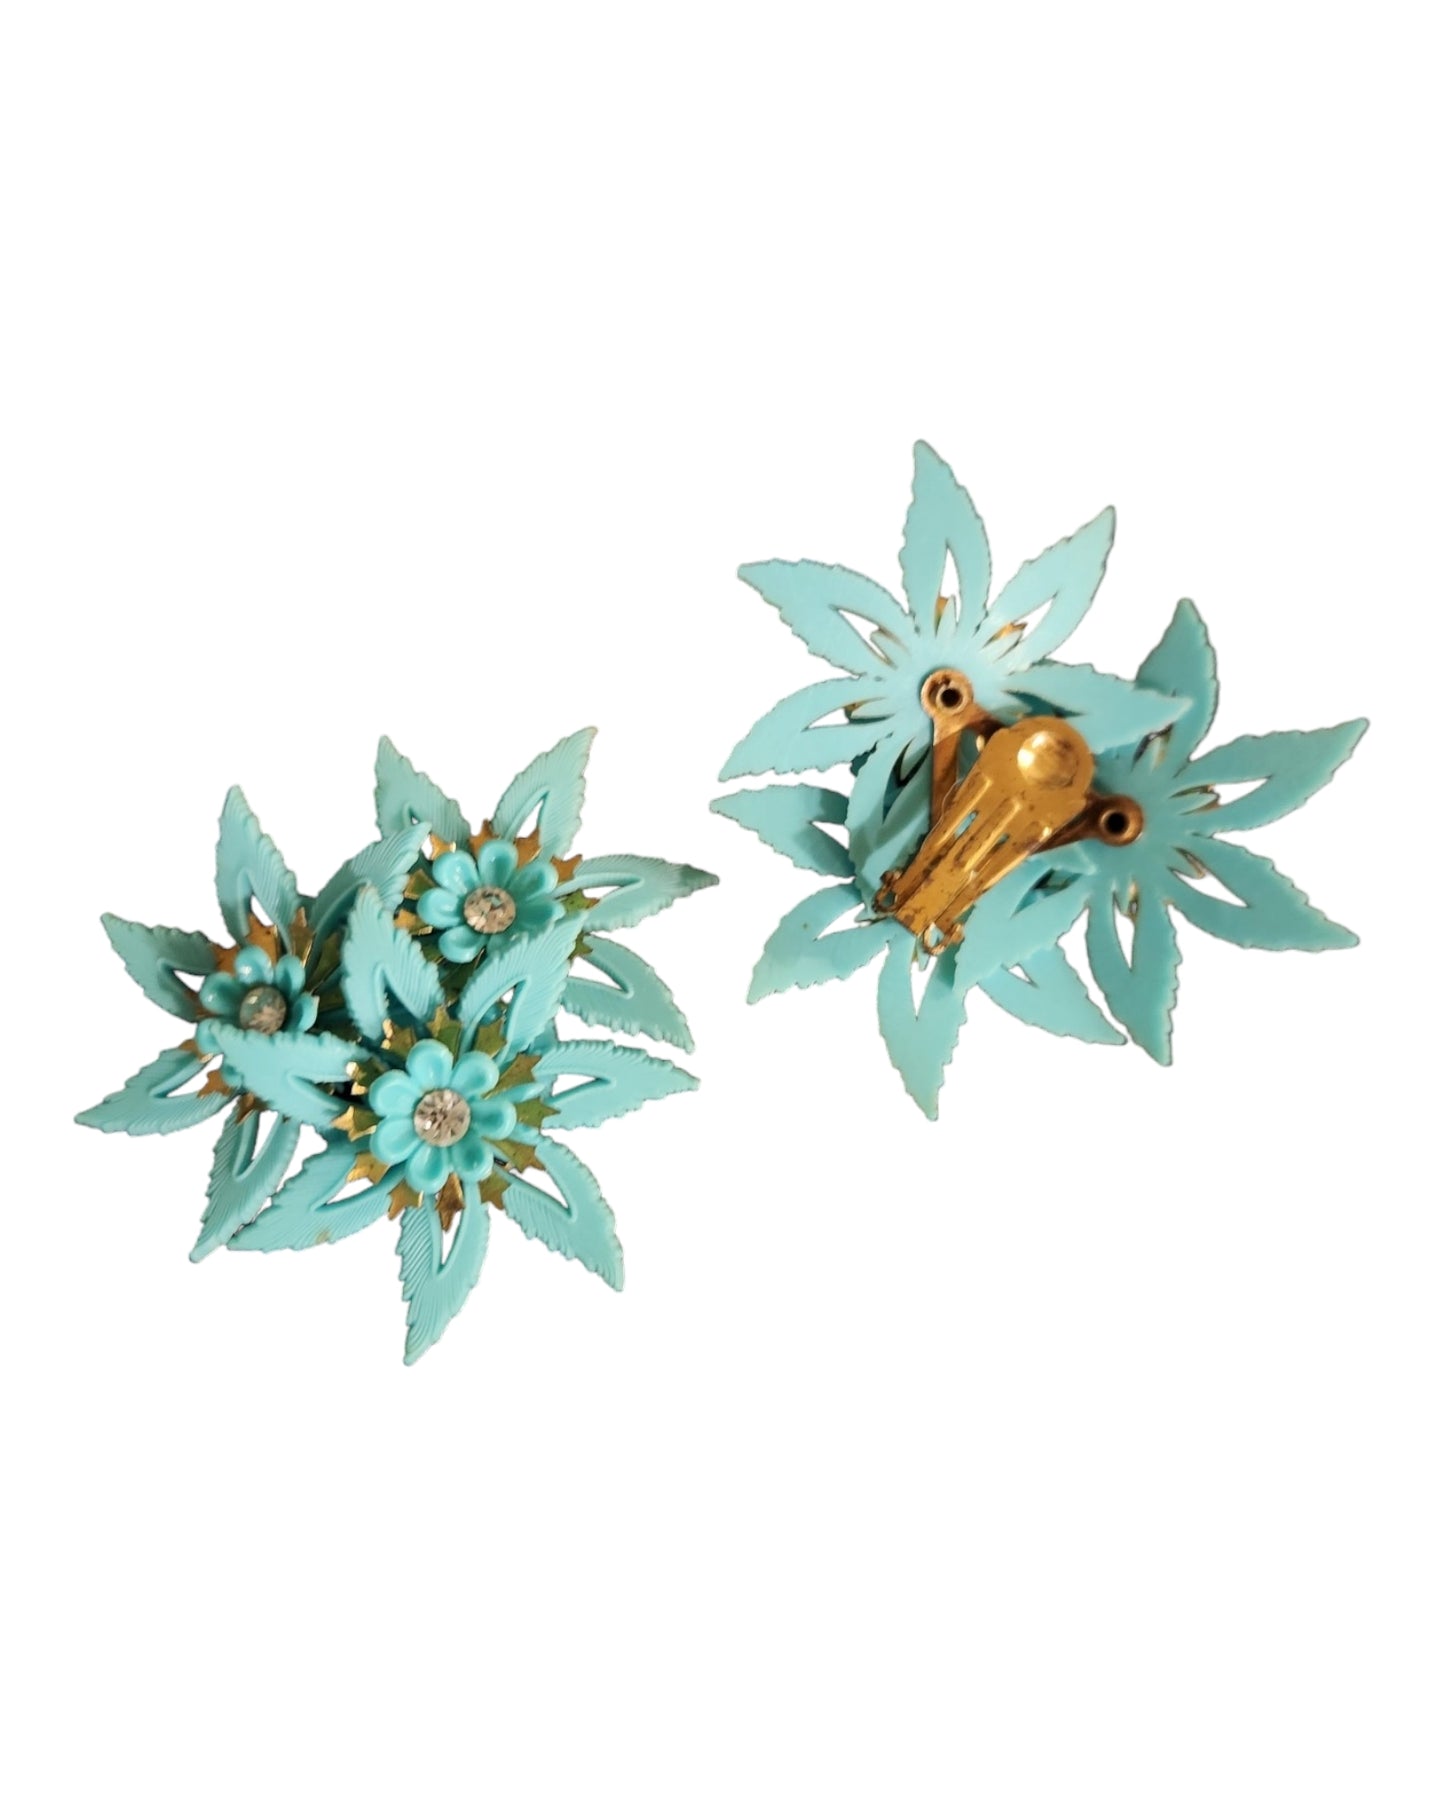 Turquoise Floral Featherweight Earrings